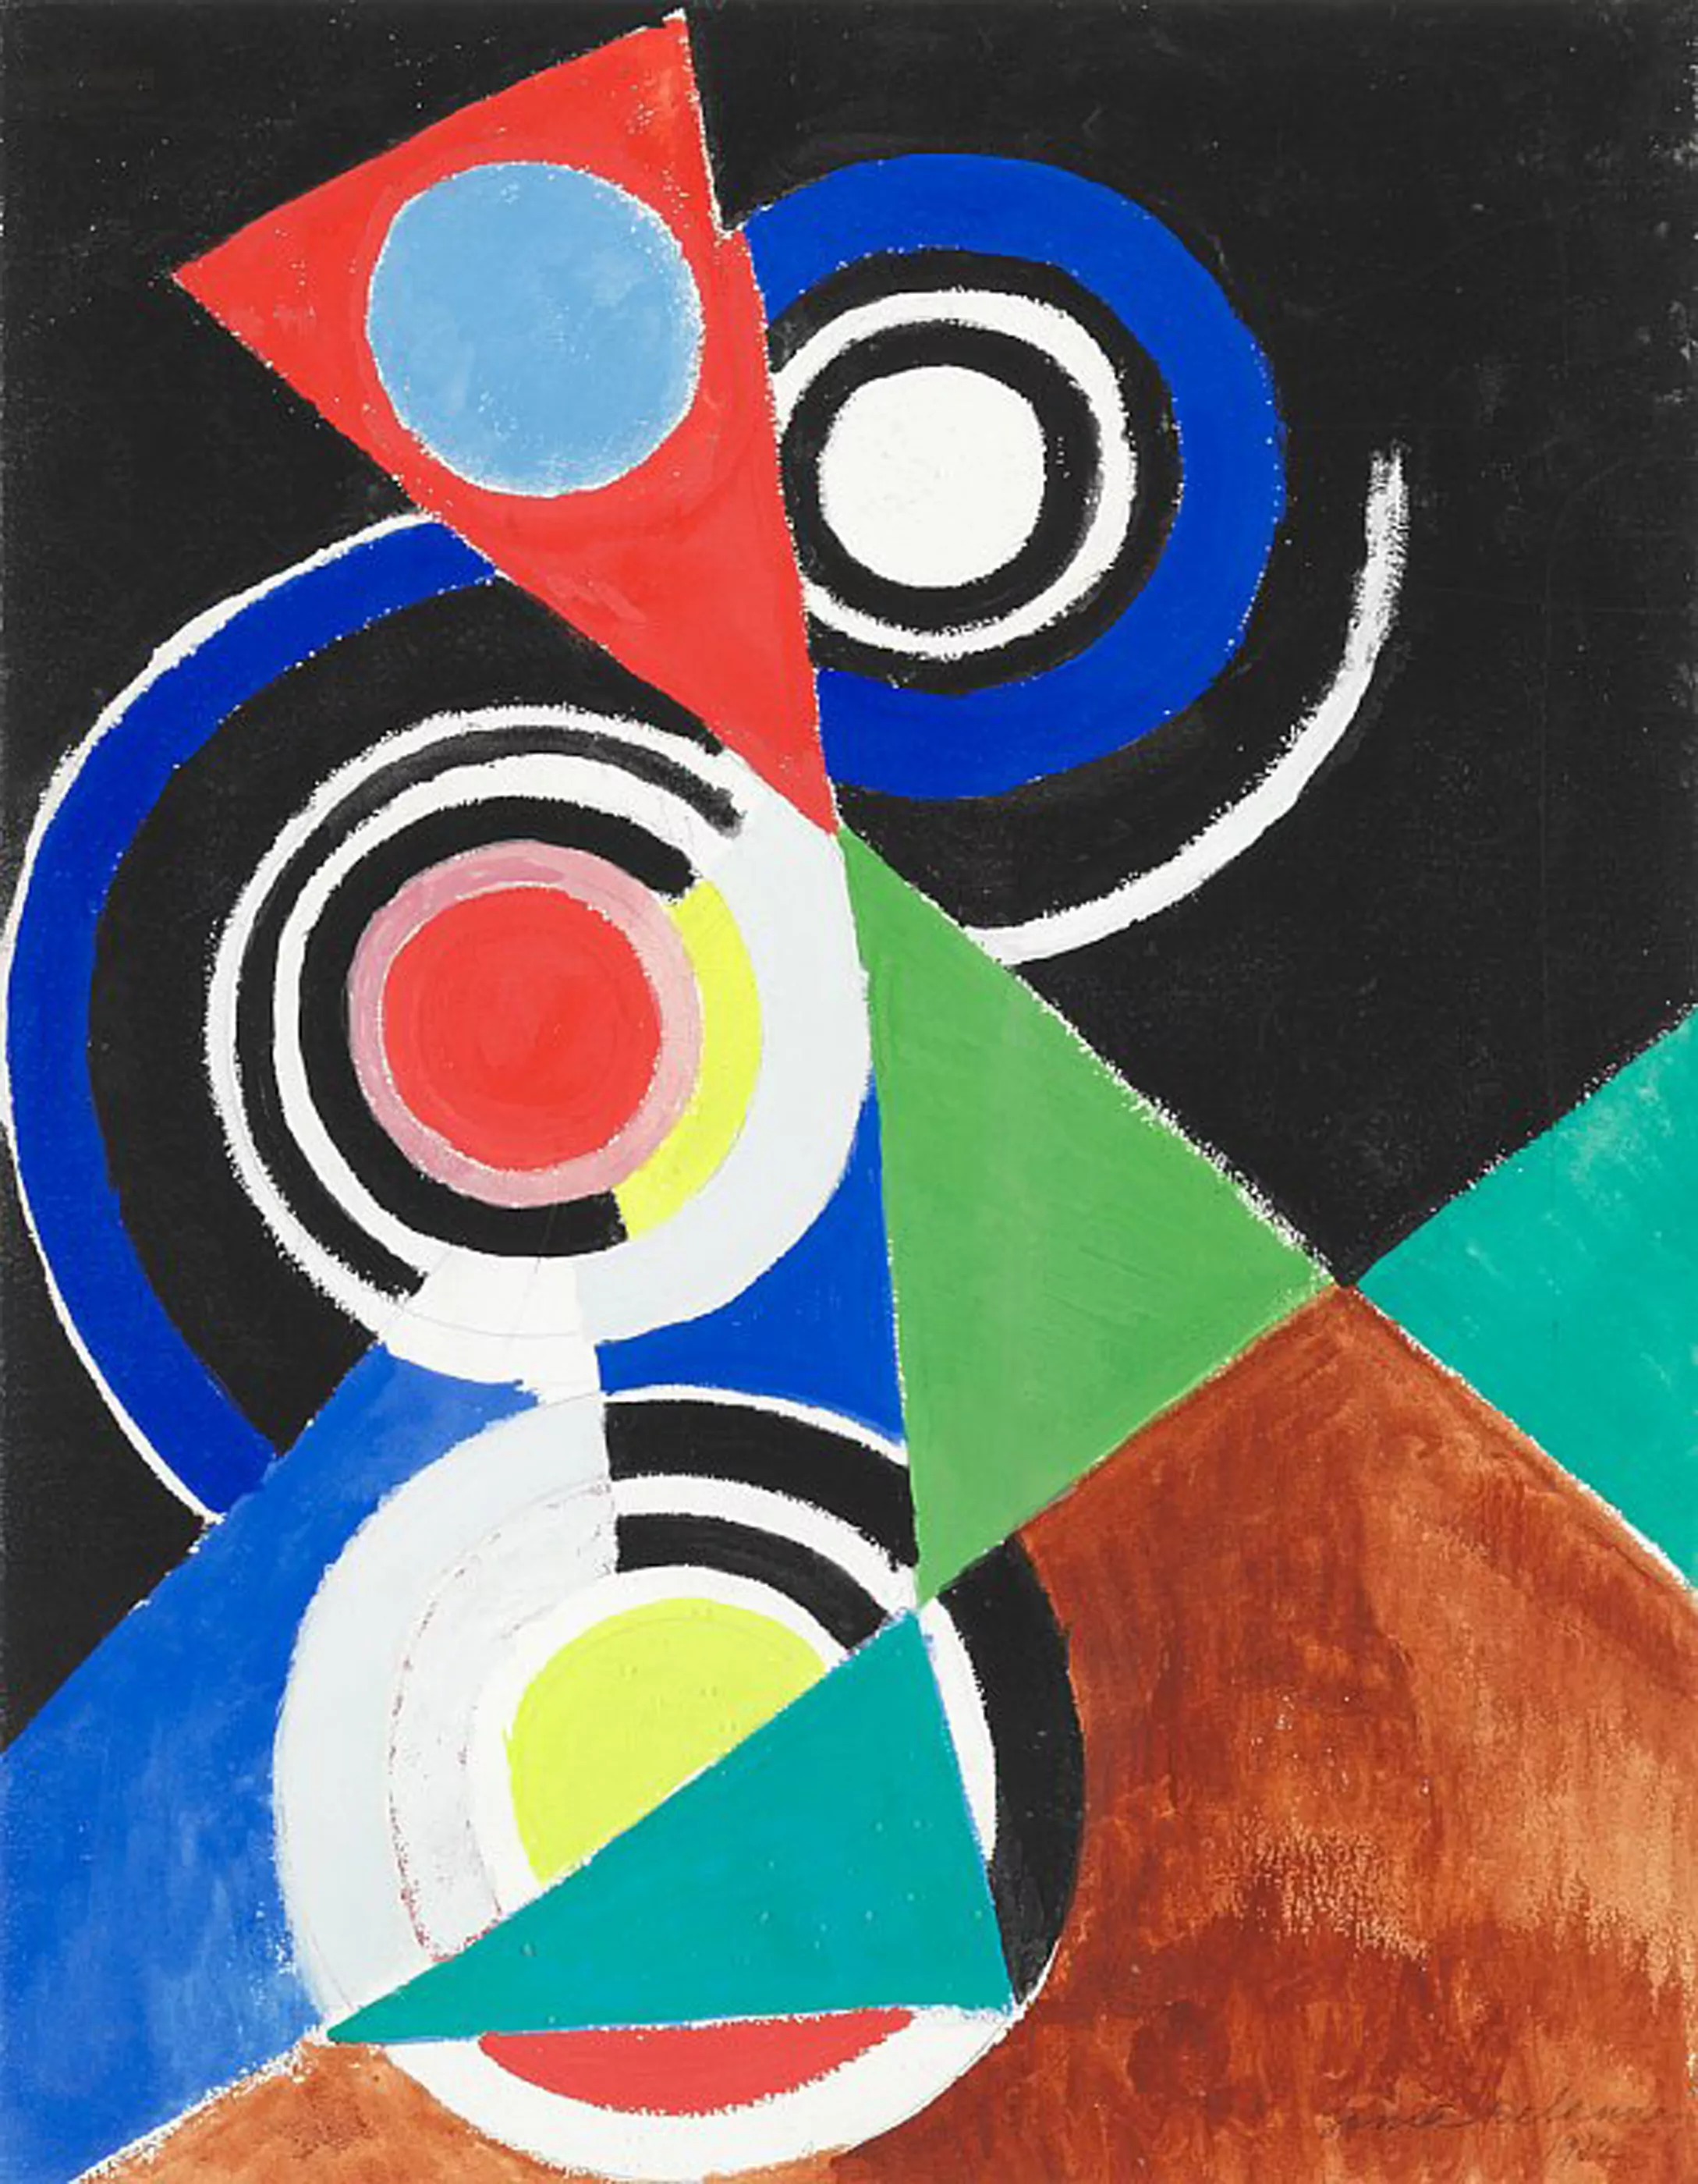 Composition for Jazz, 2nd Series, Sonia Delaunay